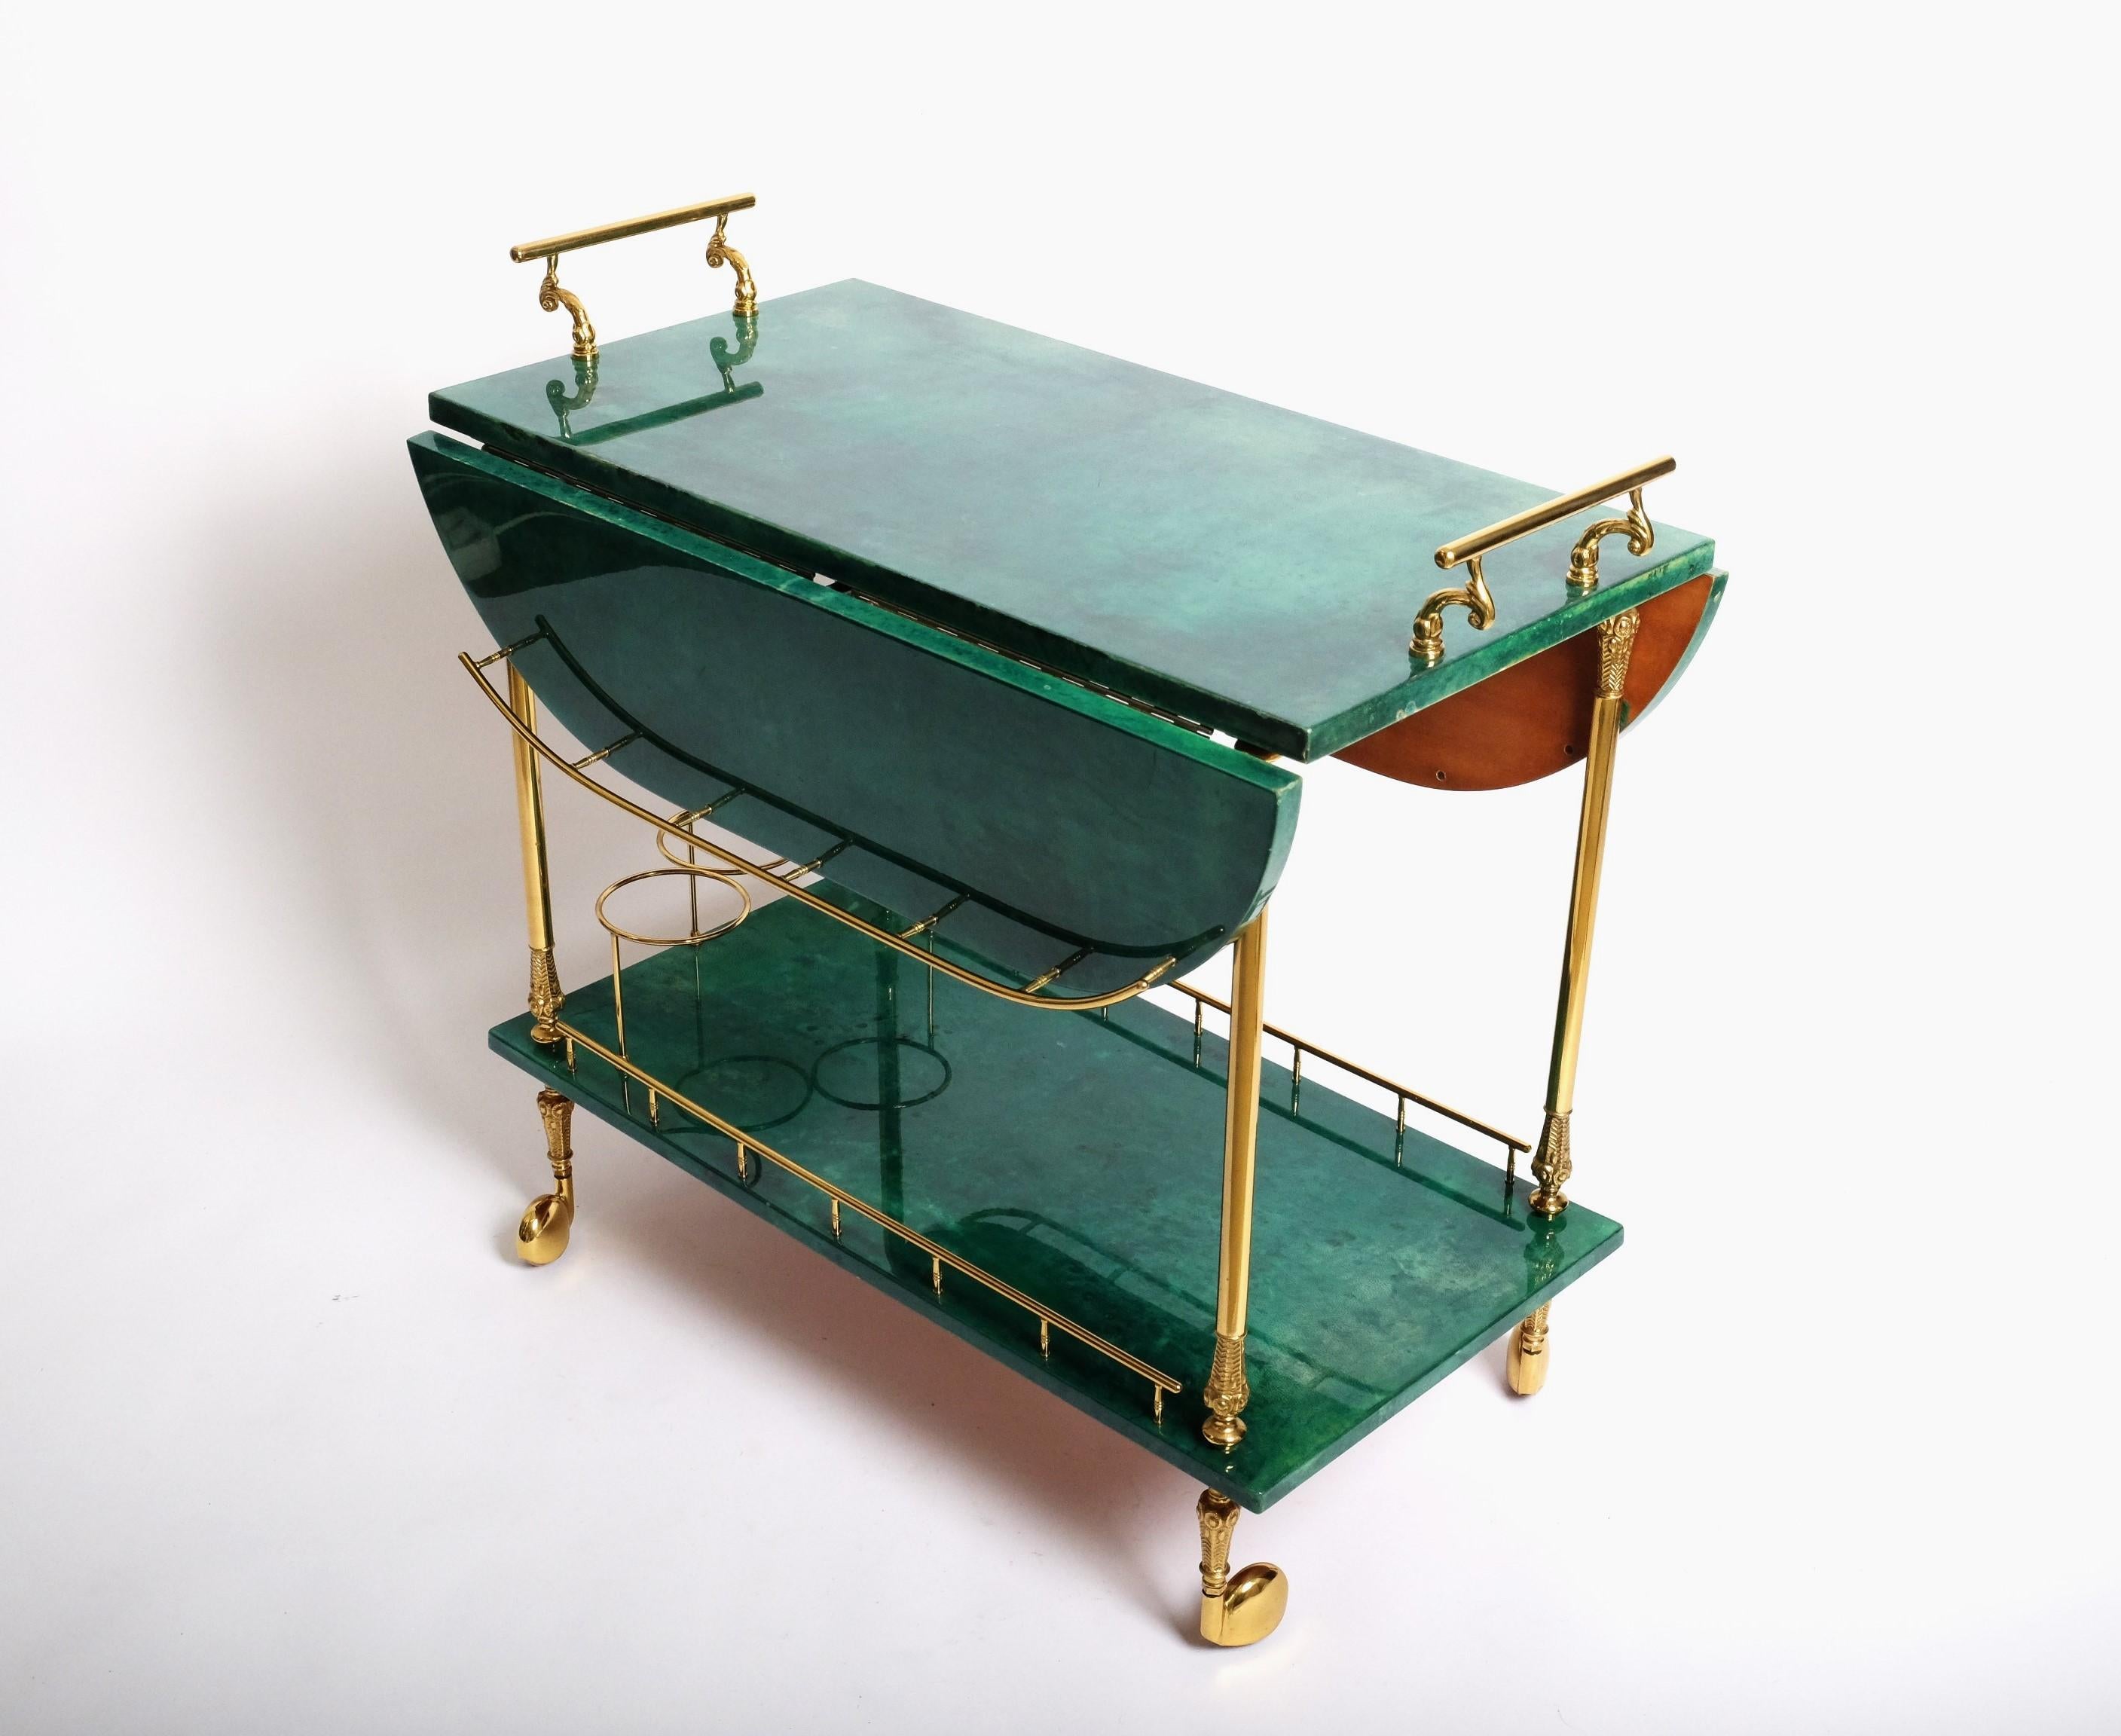 Beautiful emerald green bar cart by Italian artist and craftsman Aldo Tura, distinguished by the use of brass and lacquered goatskin that Tura was known for. The quality of Aldo Tura's craftsmanship is due to the fact that his works were only